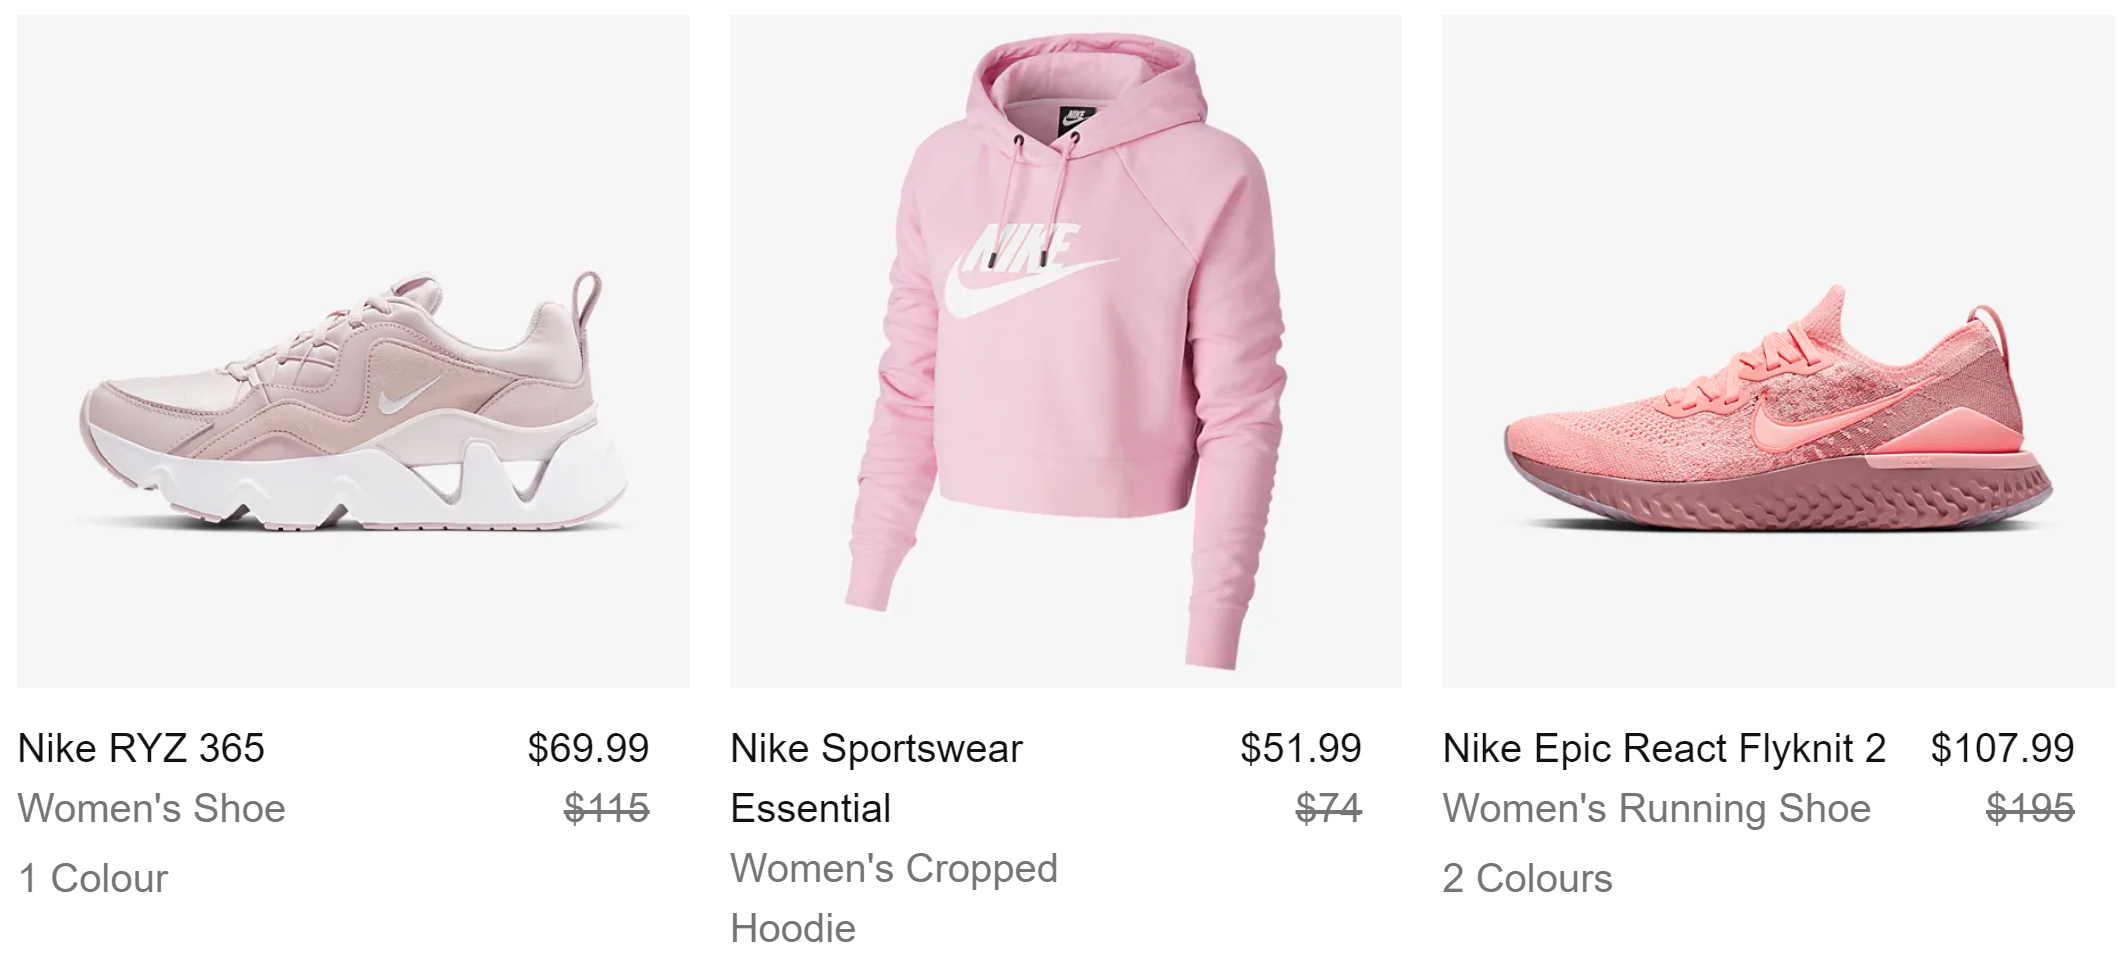 nike-pink-zone-as-low-as-46-fold-compete-for-the-sweet-sport-girl-2020-7-24